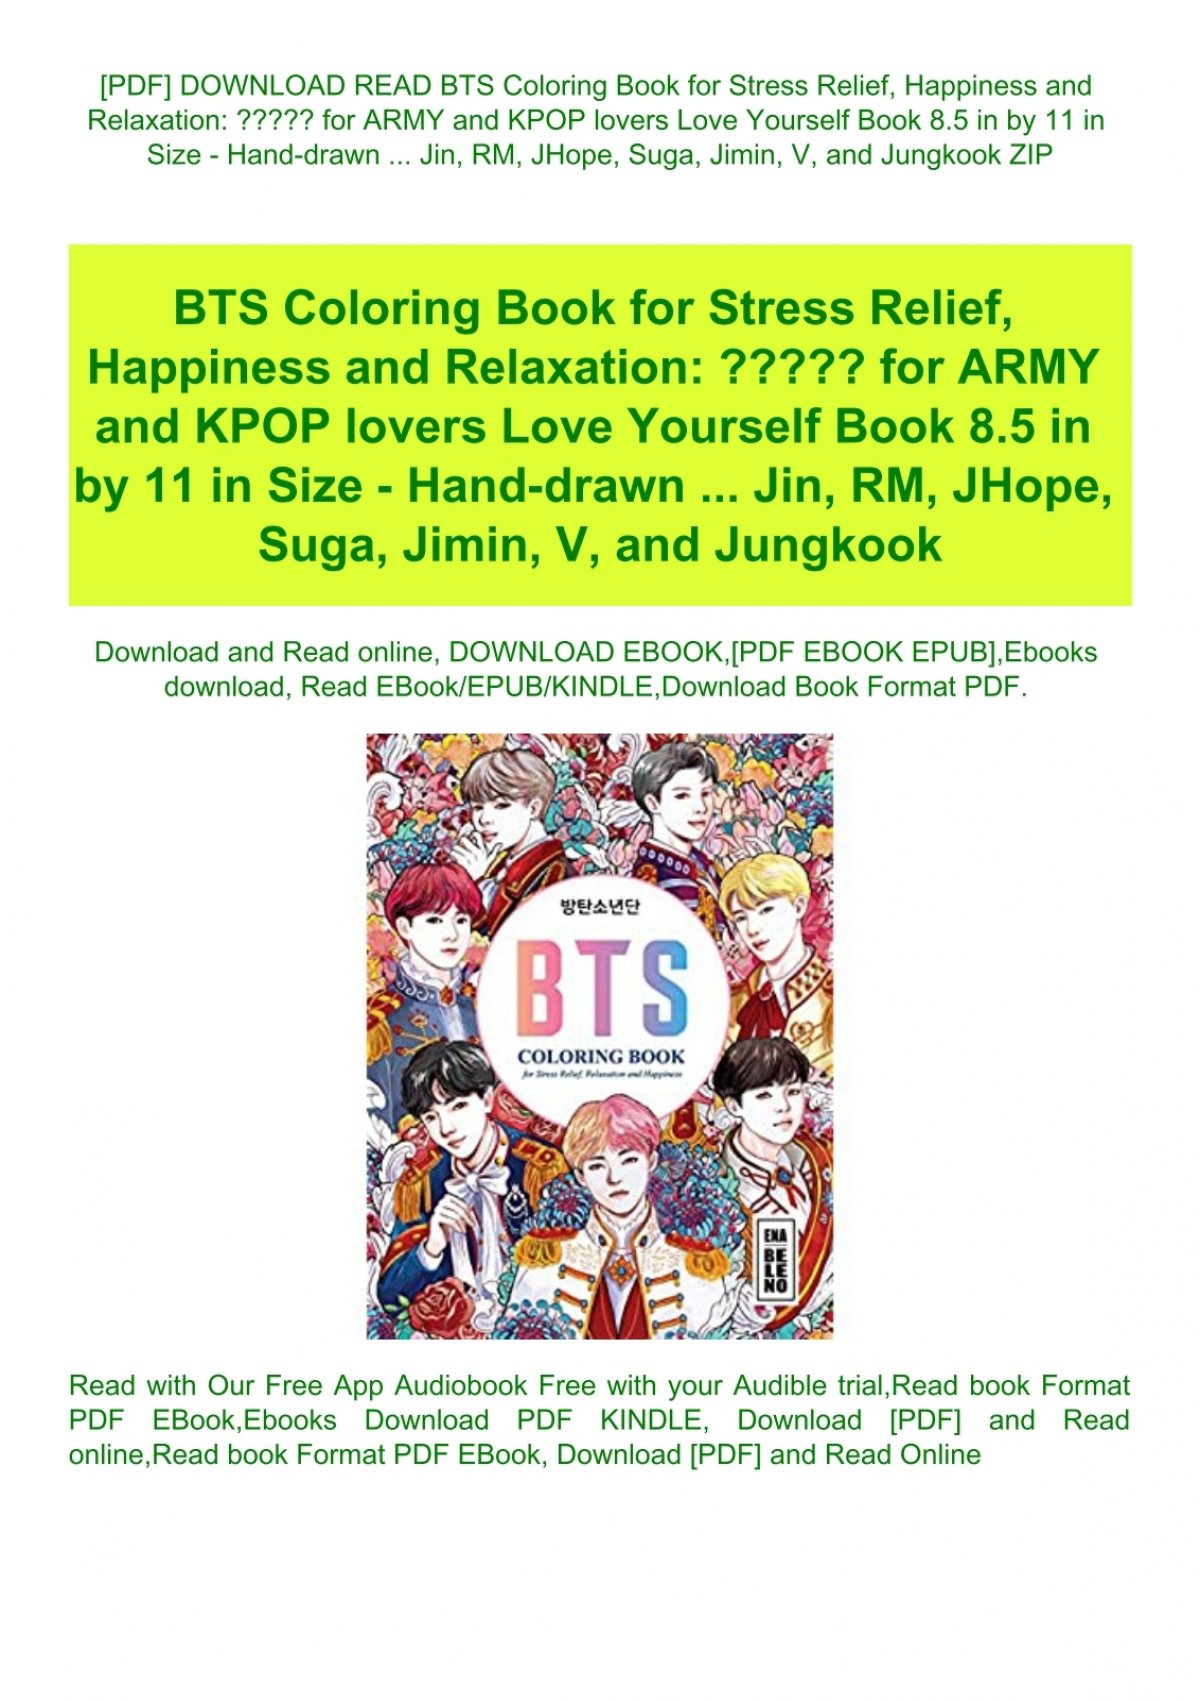 Download Pdf Download Read Bts Coloring Book For Stress Relief Happiness And Relaxation For Army And Kpop Lovers Love Yourself Book 8 5 In By 11 In Size Hand Drawn Jin Rm Jhope